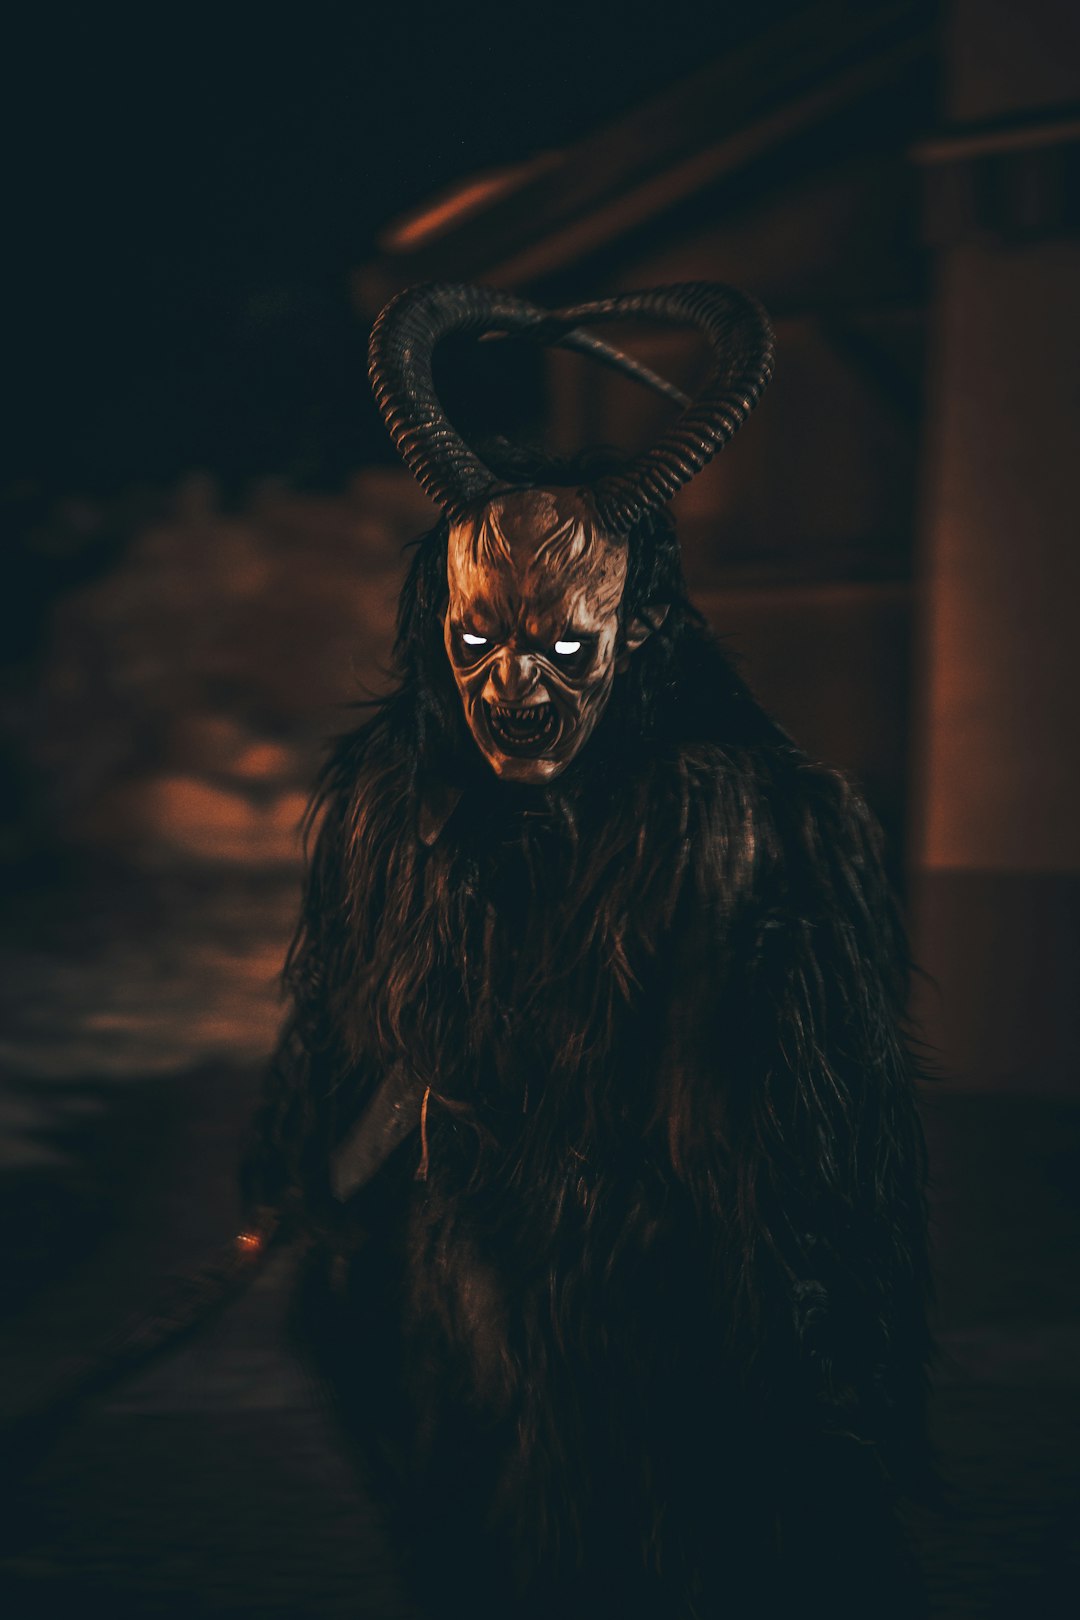 Krampus: one of the traditions of South Tyrol (Northern Italy)